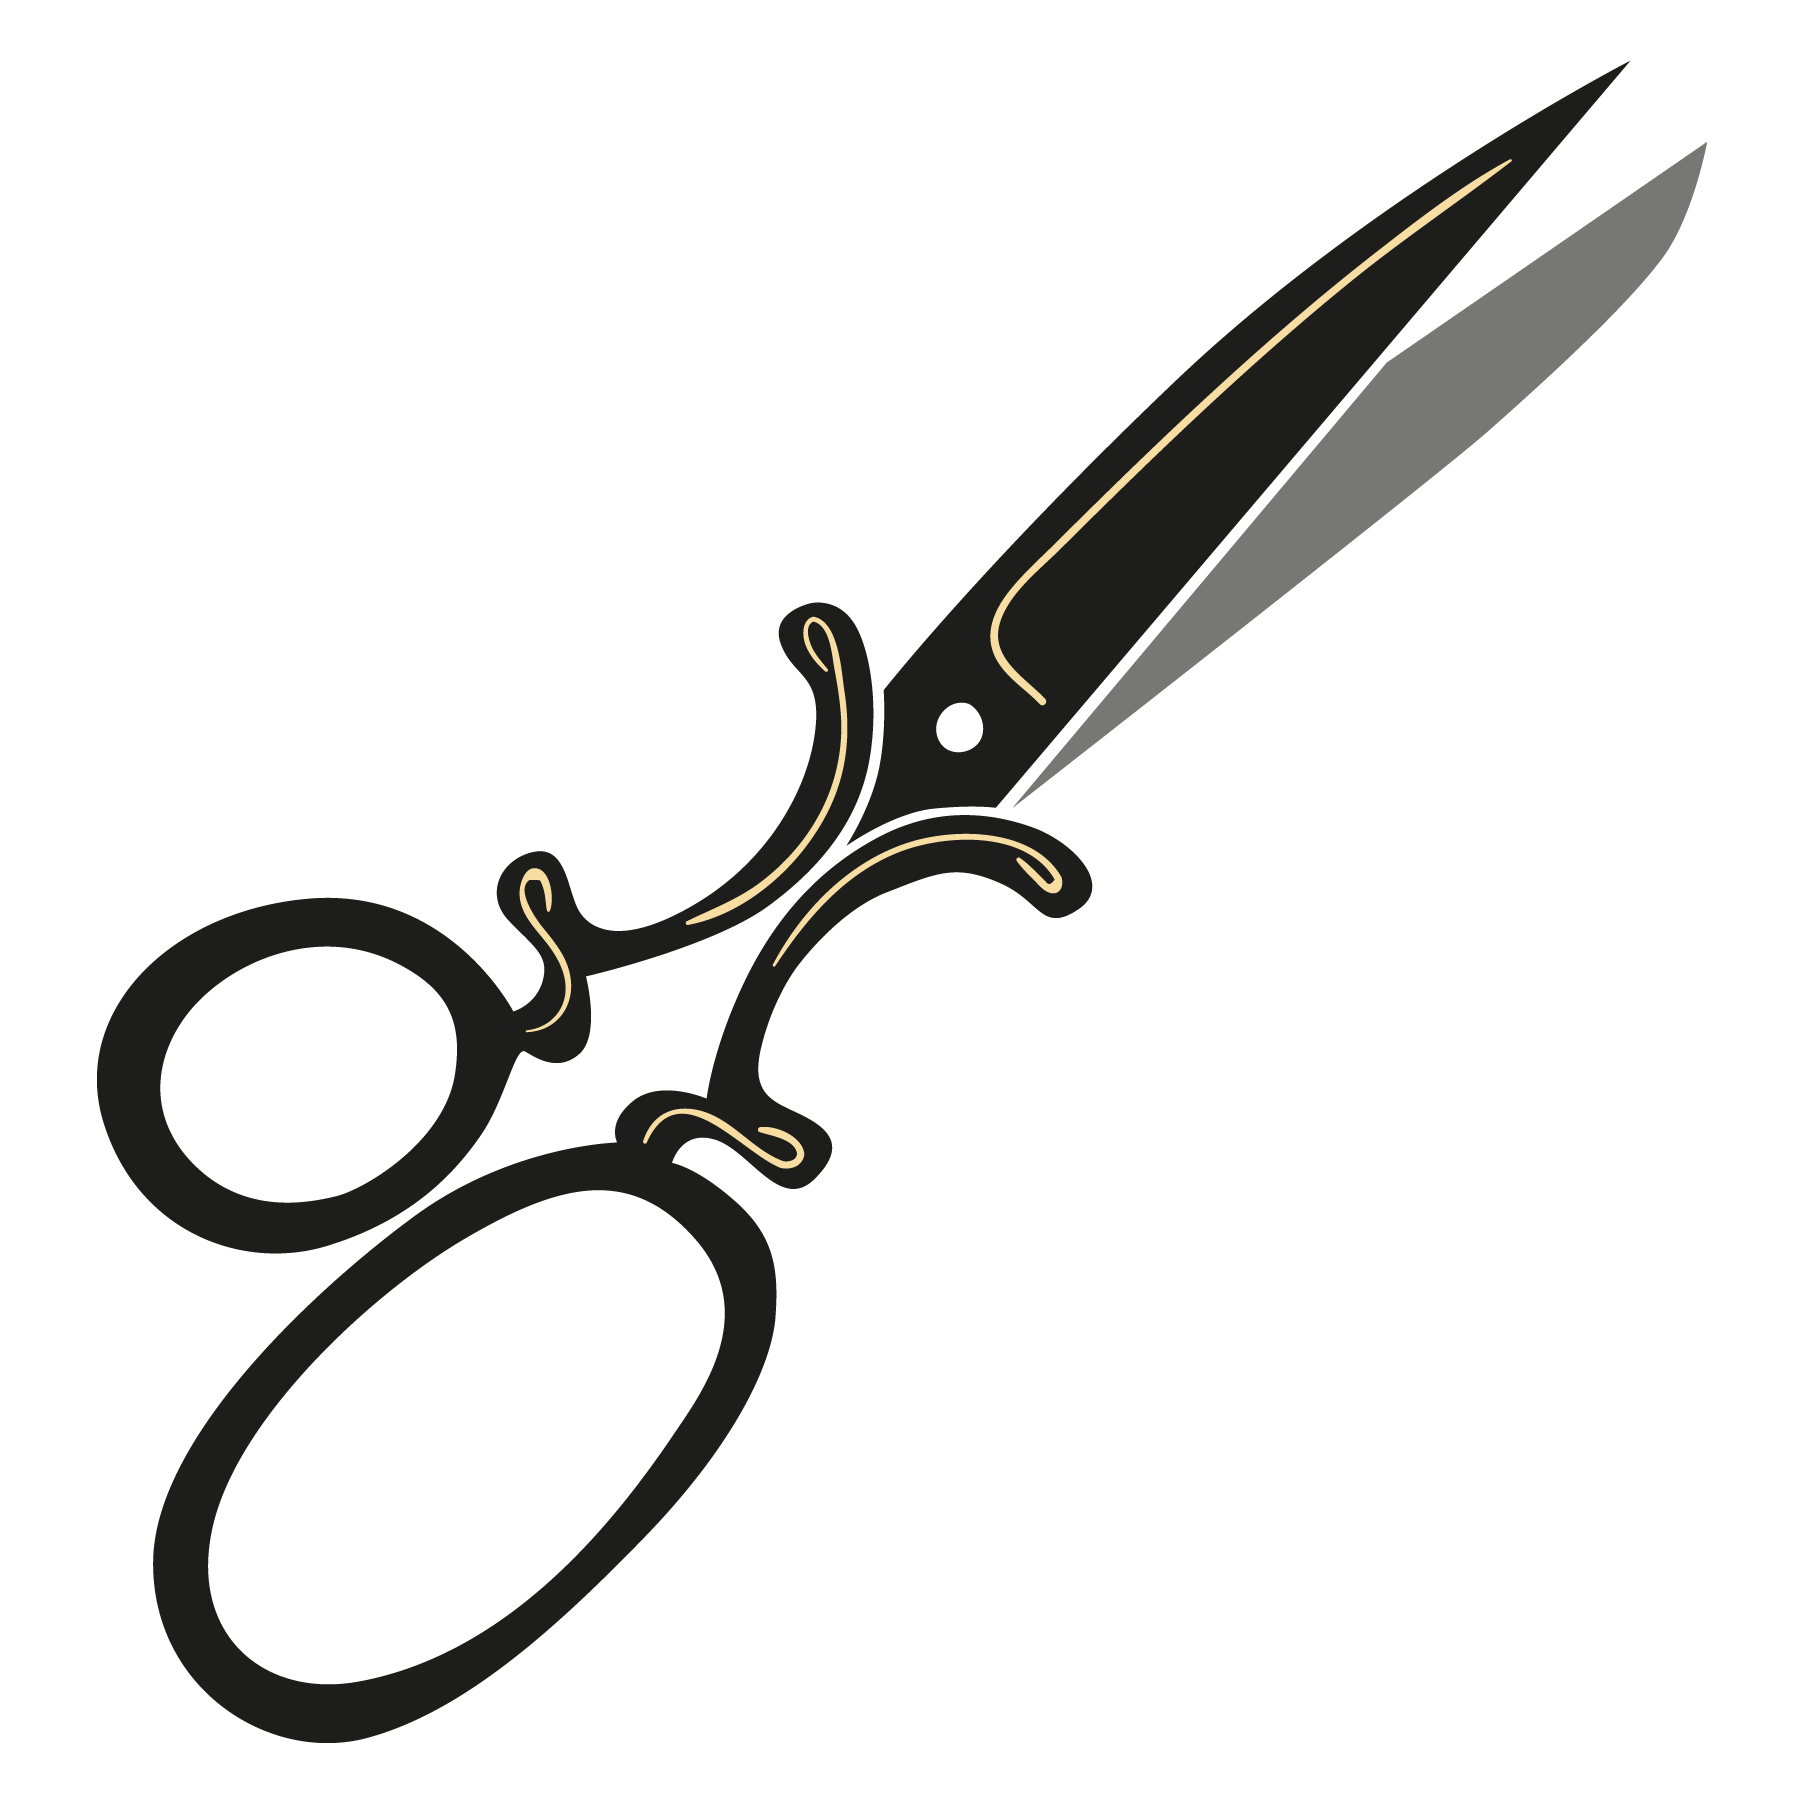 Free fptfy png image. Shears clipart sewing